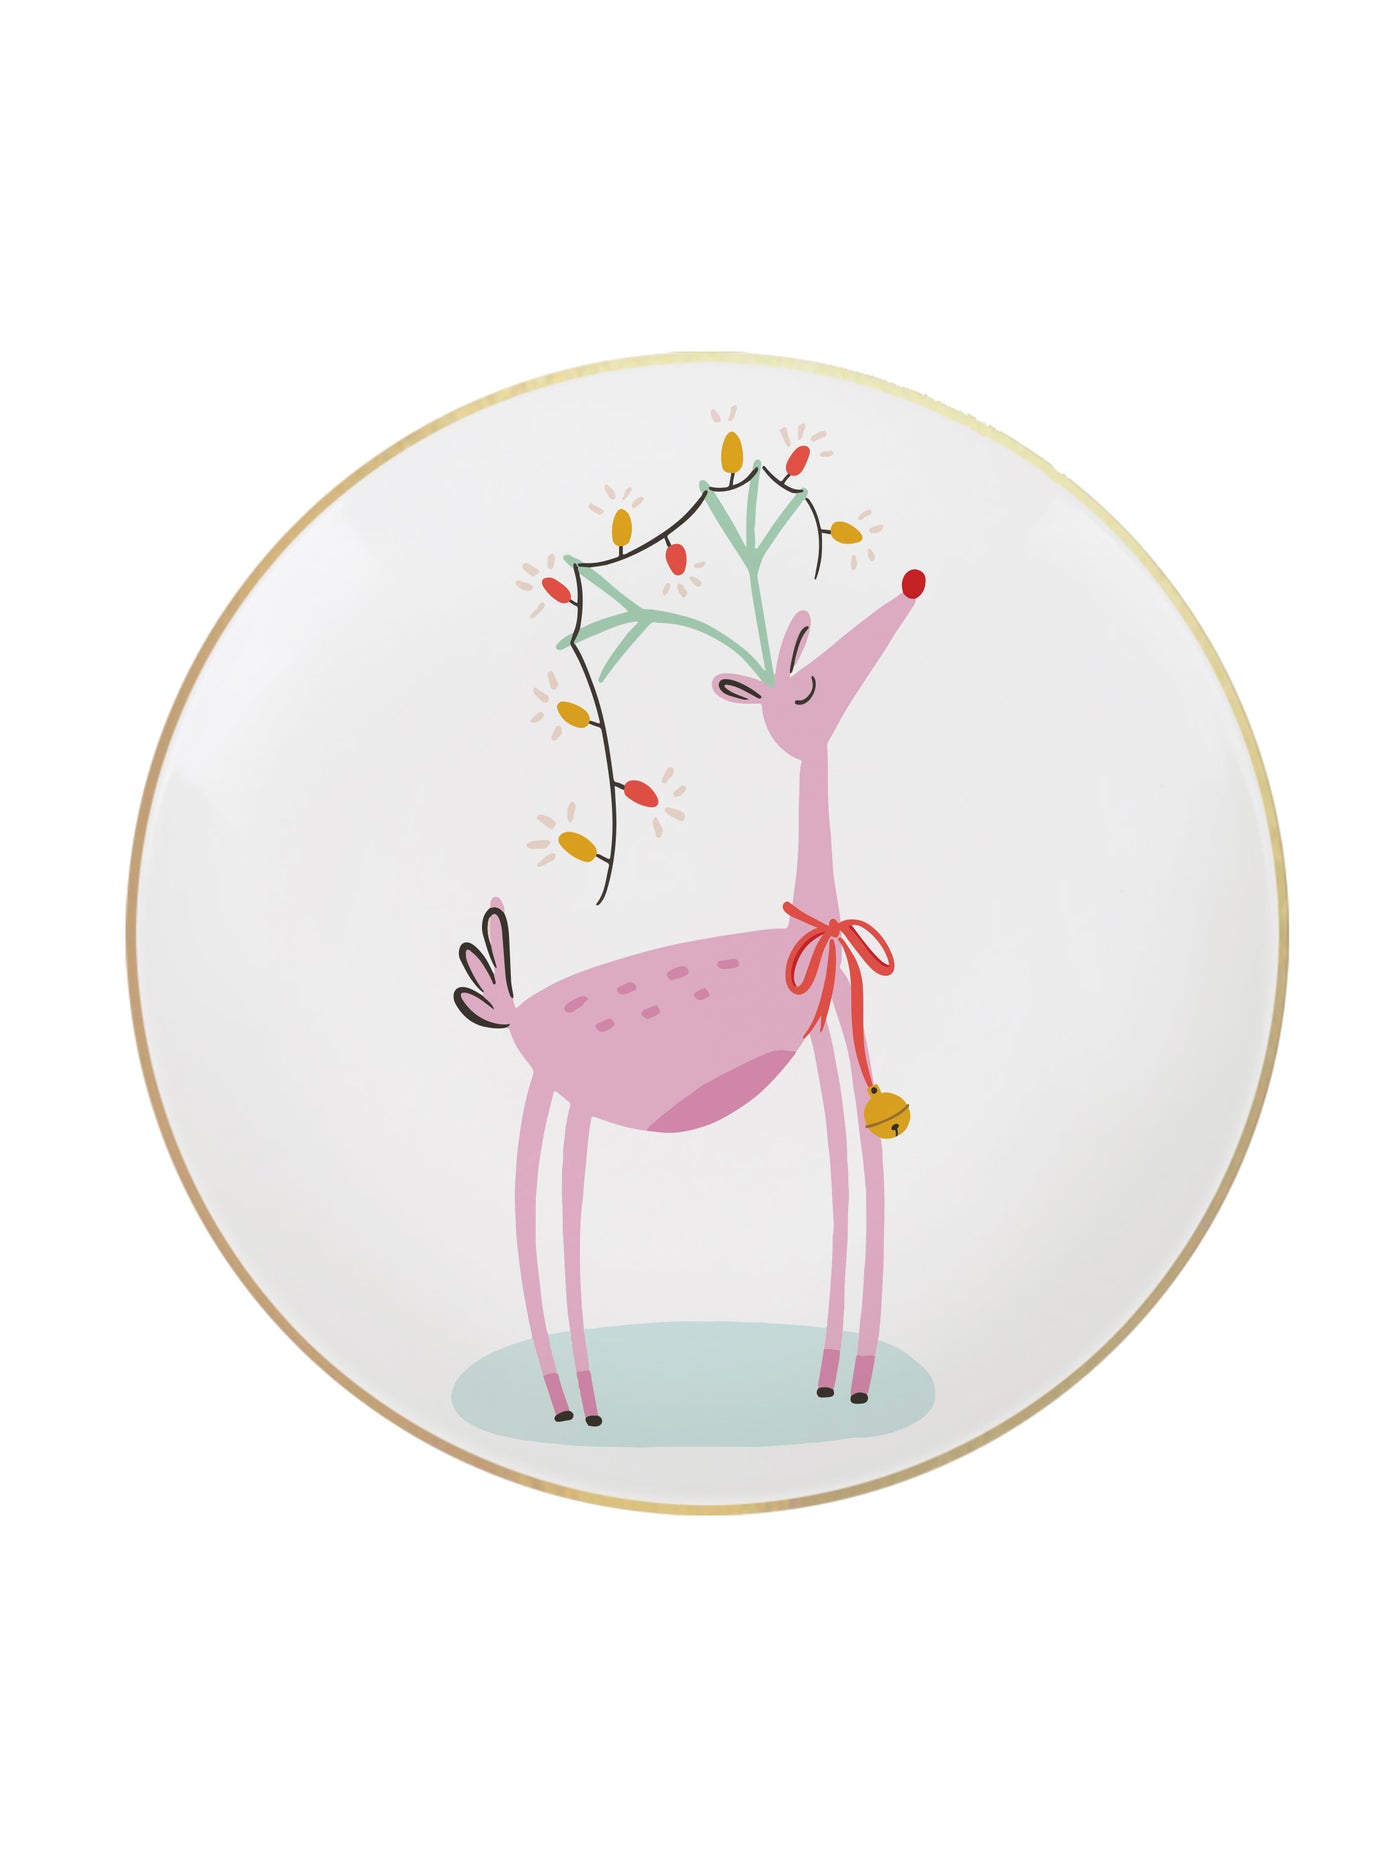 Appetizer Plate | Whimsical Reindeer - Set of 4